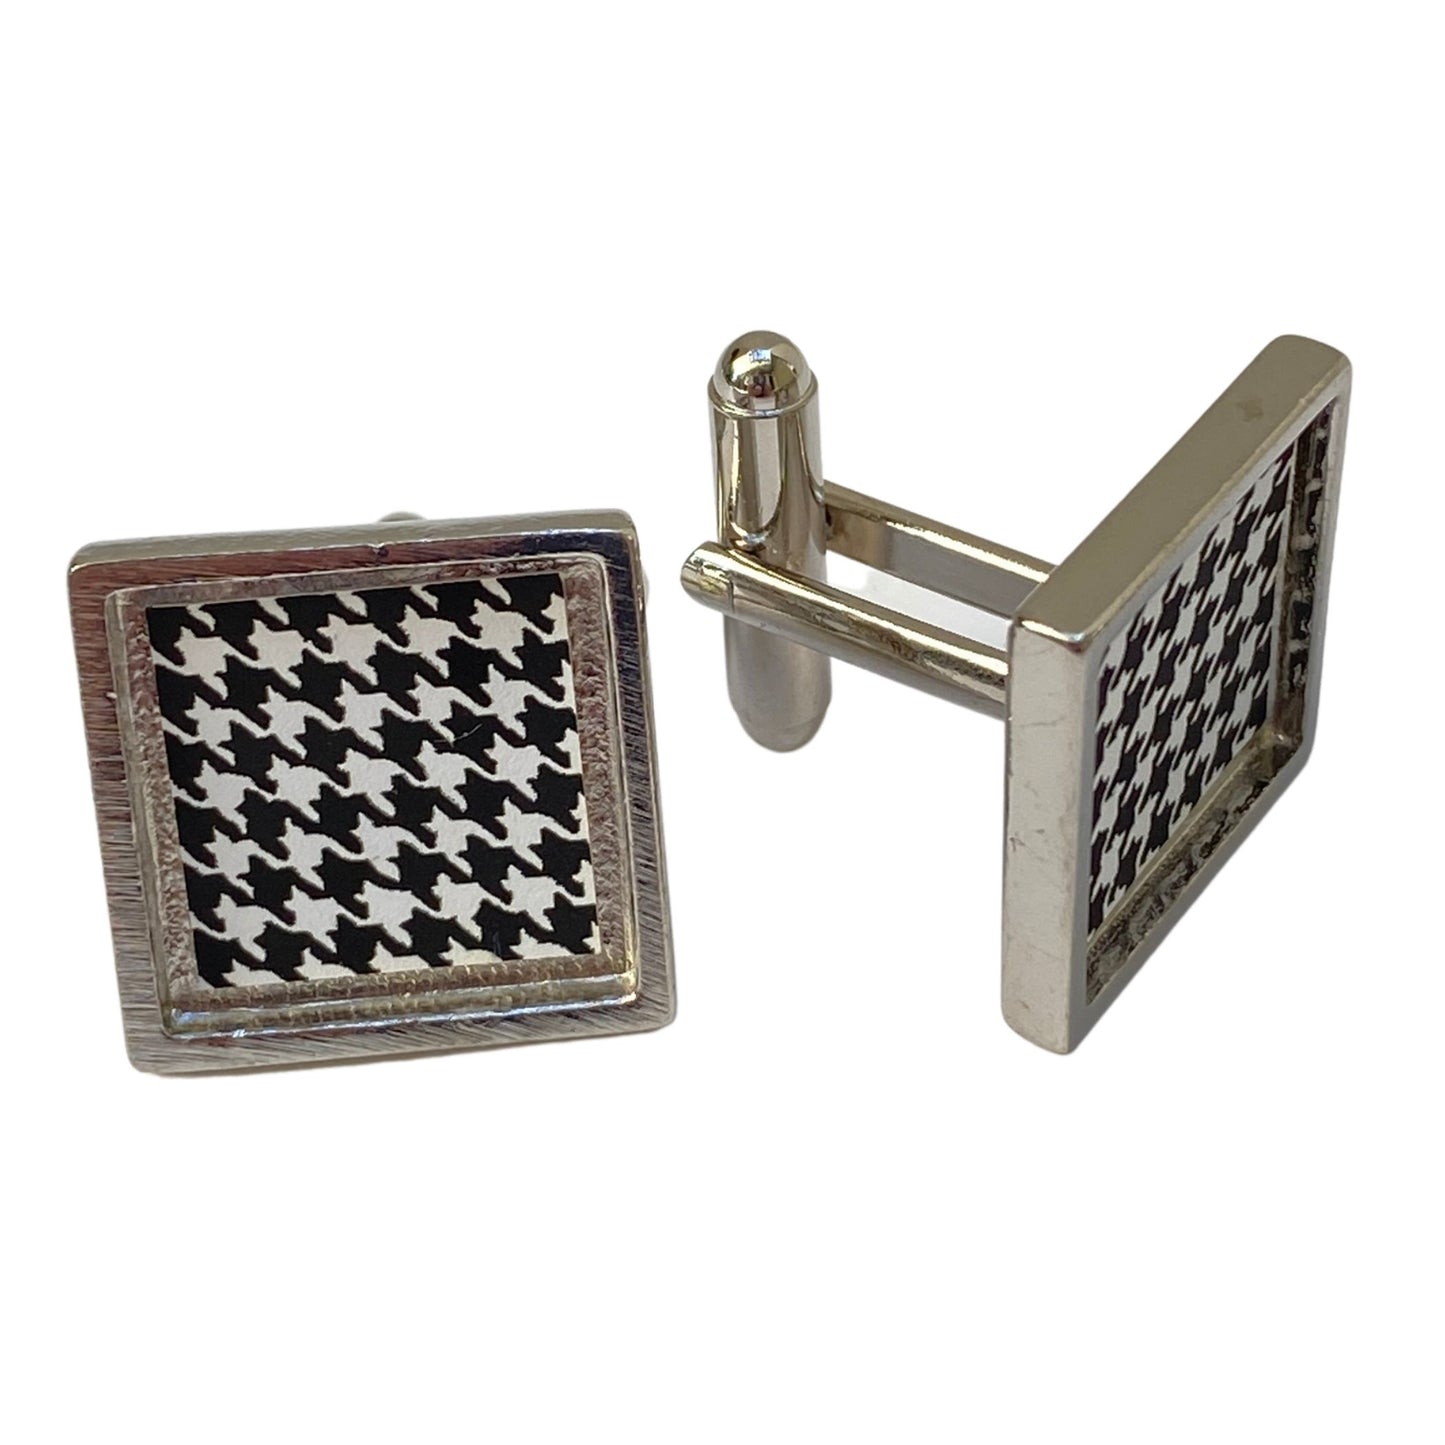 Cuff Links, Black and White Houndstooth Check, Handmade